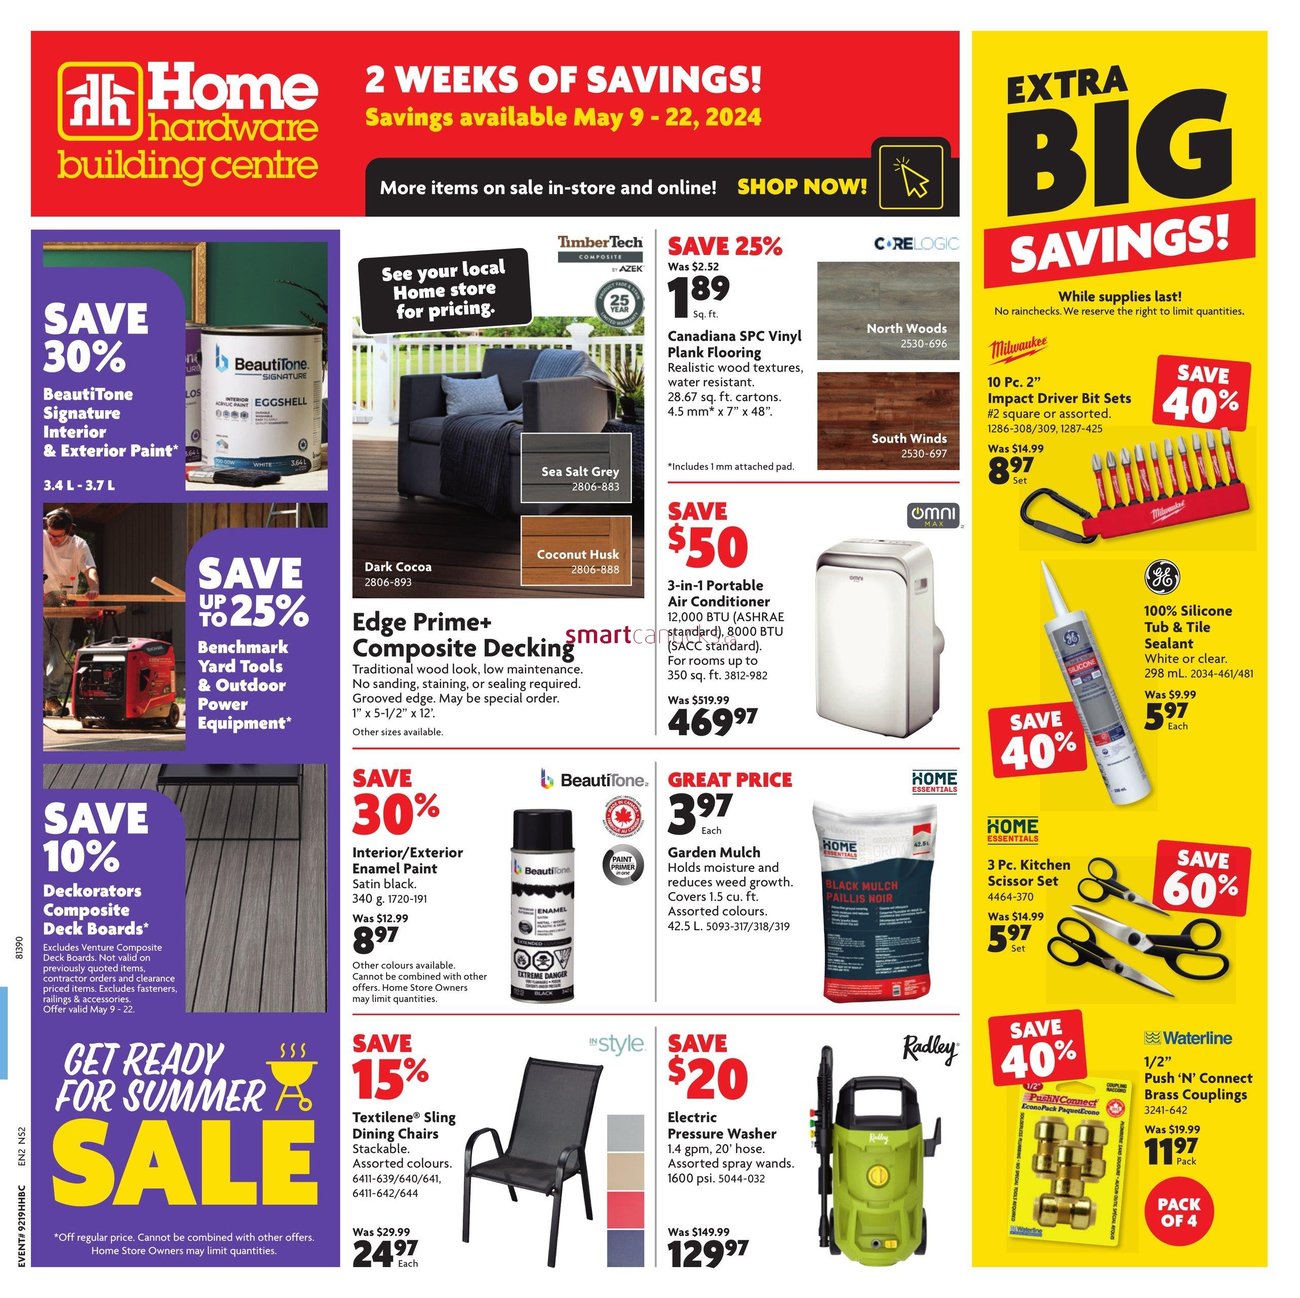 Home Hardware Building Centre - Atlantic - 2 Weeks of Savings - Page 1